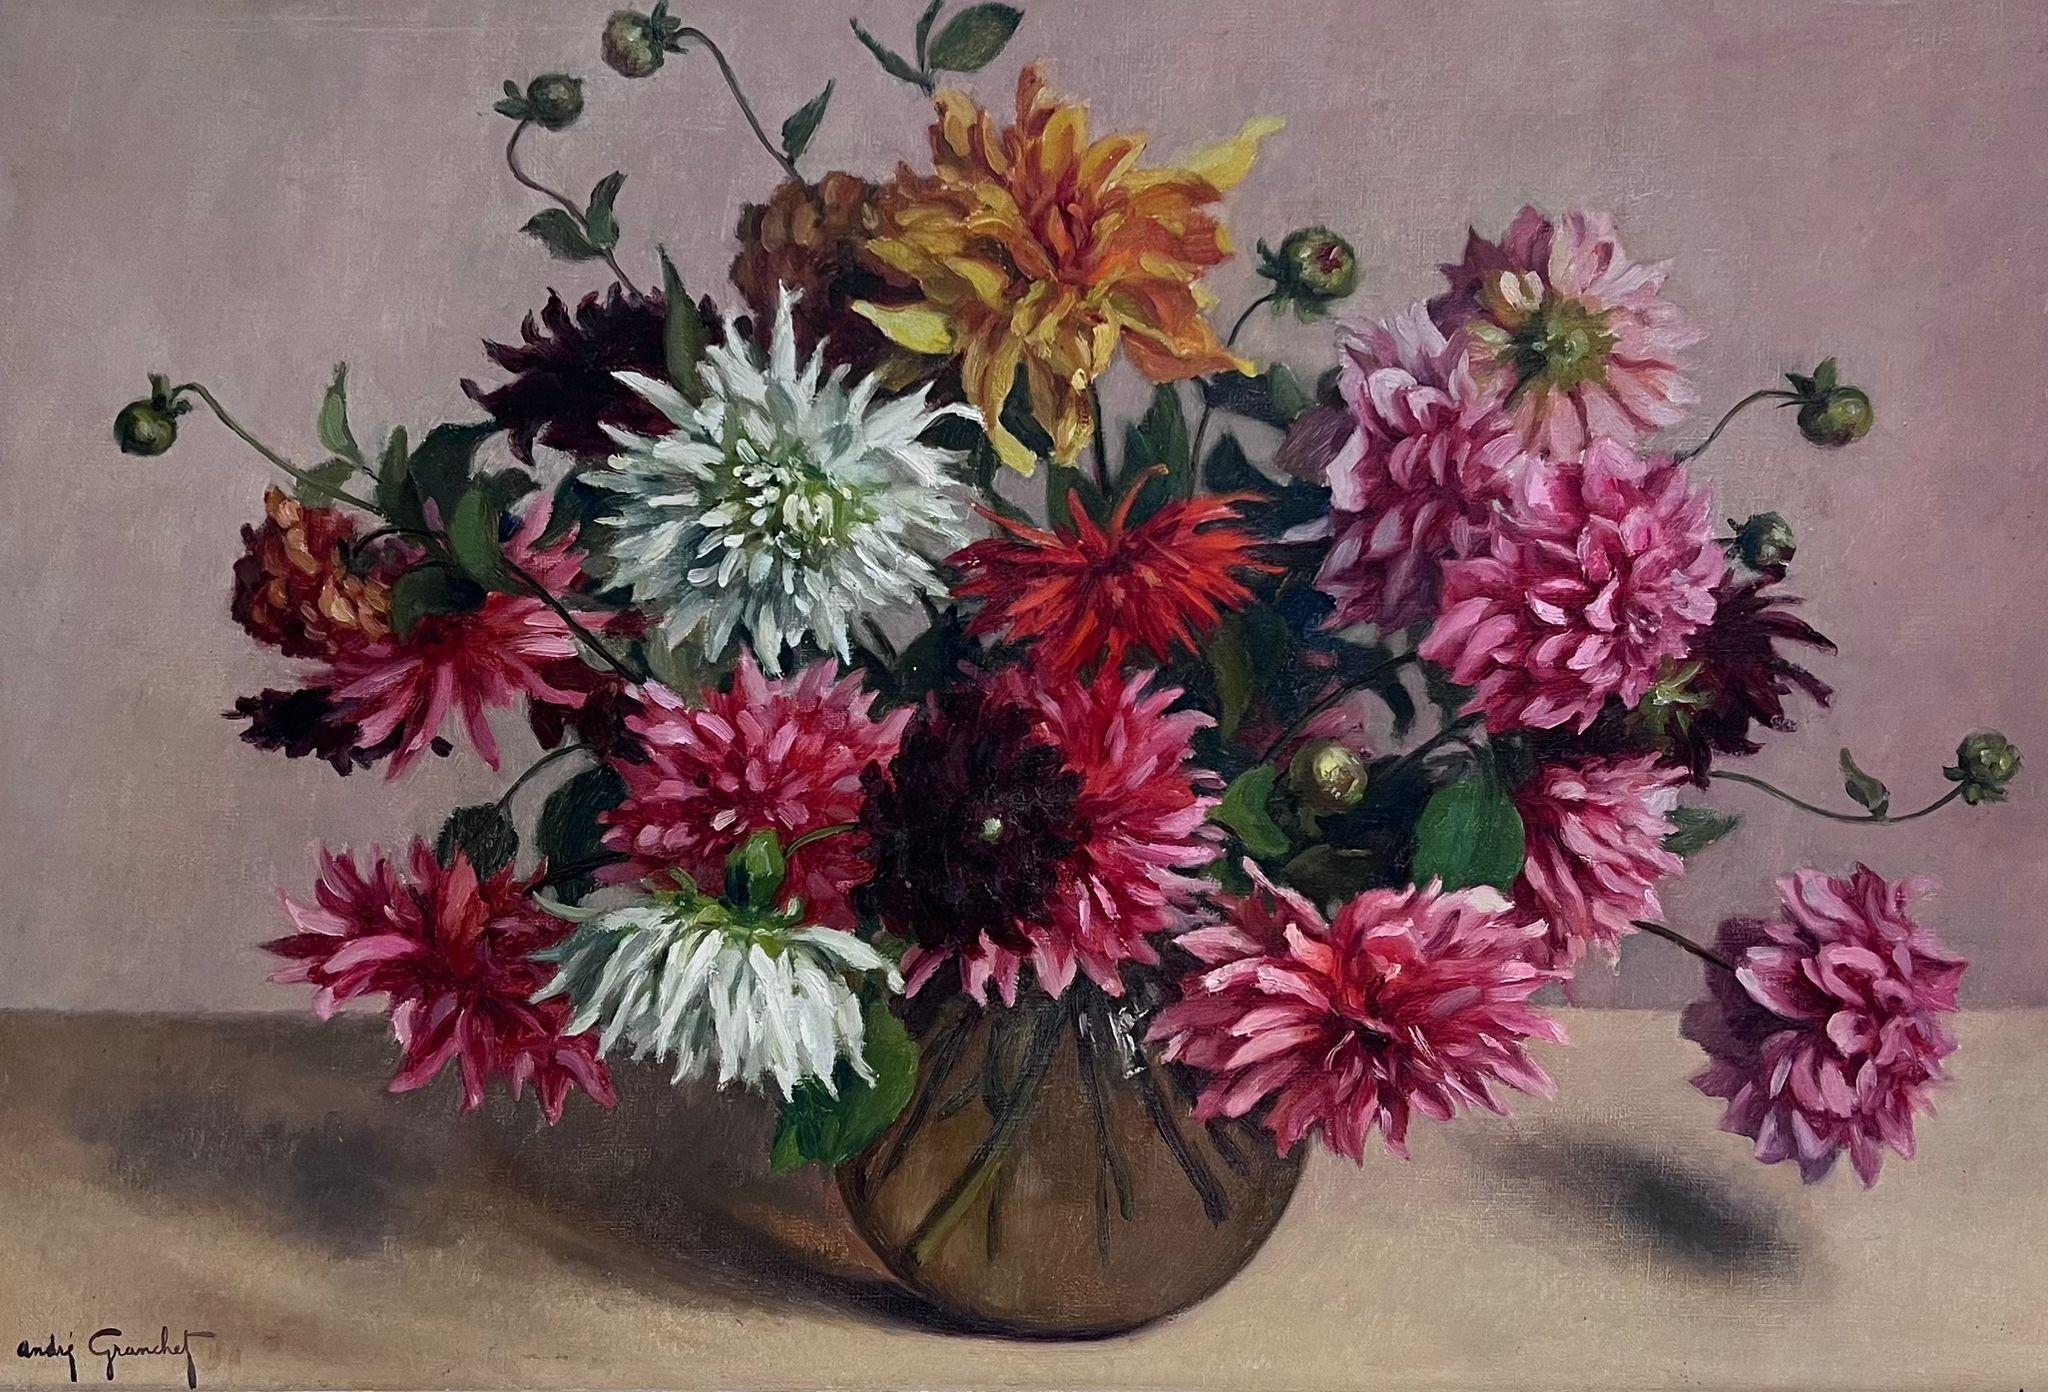 Flowers in Vase
French School, mid 20th century
signed oil on canvas, framed in original frame. 
framed: 29.5 x 40 inches
canvas: 21.5 x 32 inches
provenance: private collection, France
condition: very good and sound condition